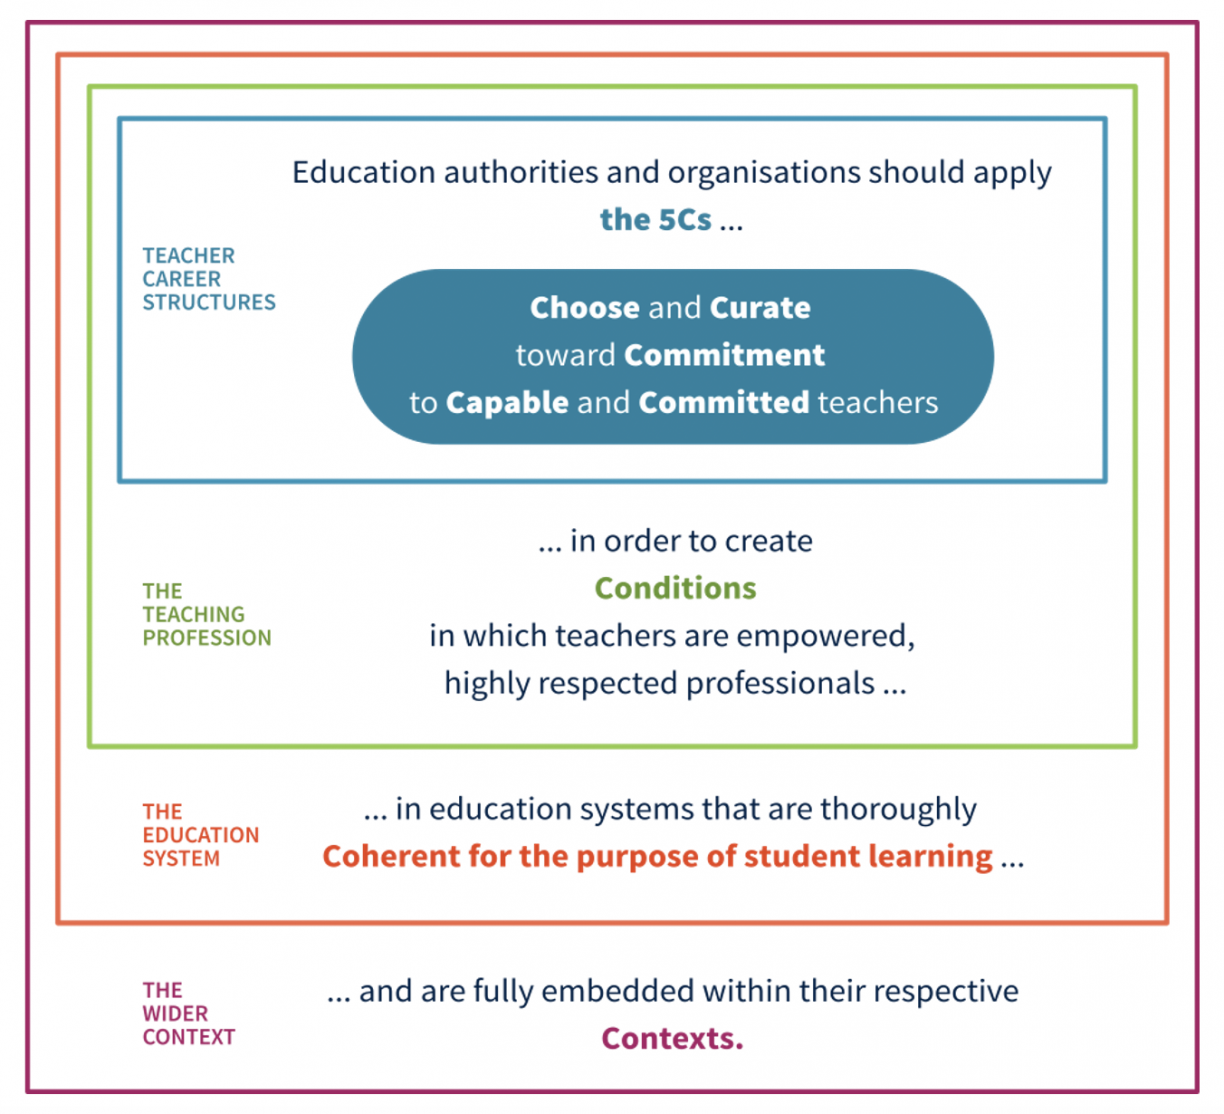 Graphic showing that the 5Cs fall within the larger category of "conditions" for empowering teachers, and this all falls within the larger category of education systems that are coherent for learning, and this all falls within the category of the wider context.